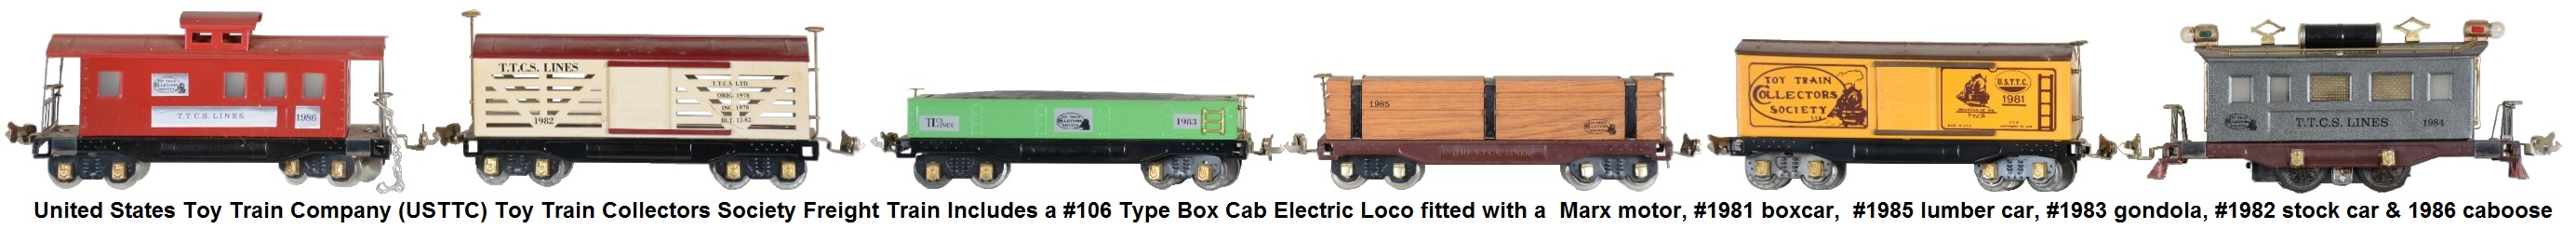 USTTC Toy Train Collectors Society freight train includes a #1983 gondola, #1981 box car, #1982 stock car, #1985 flat car with lumber load, #1986 caboose, and #1984 box cab electric locomotive